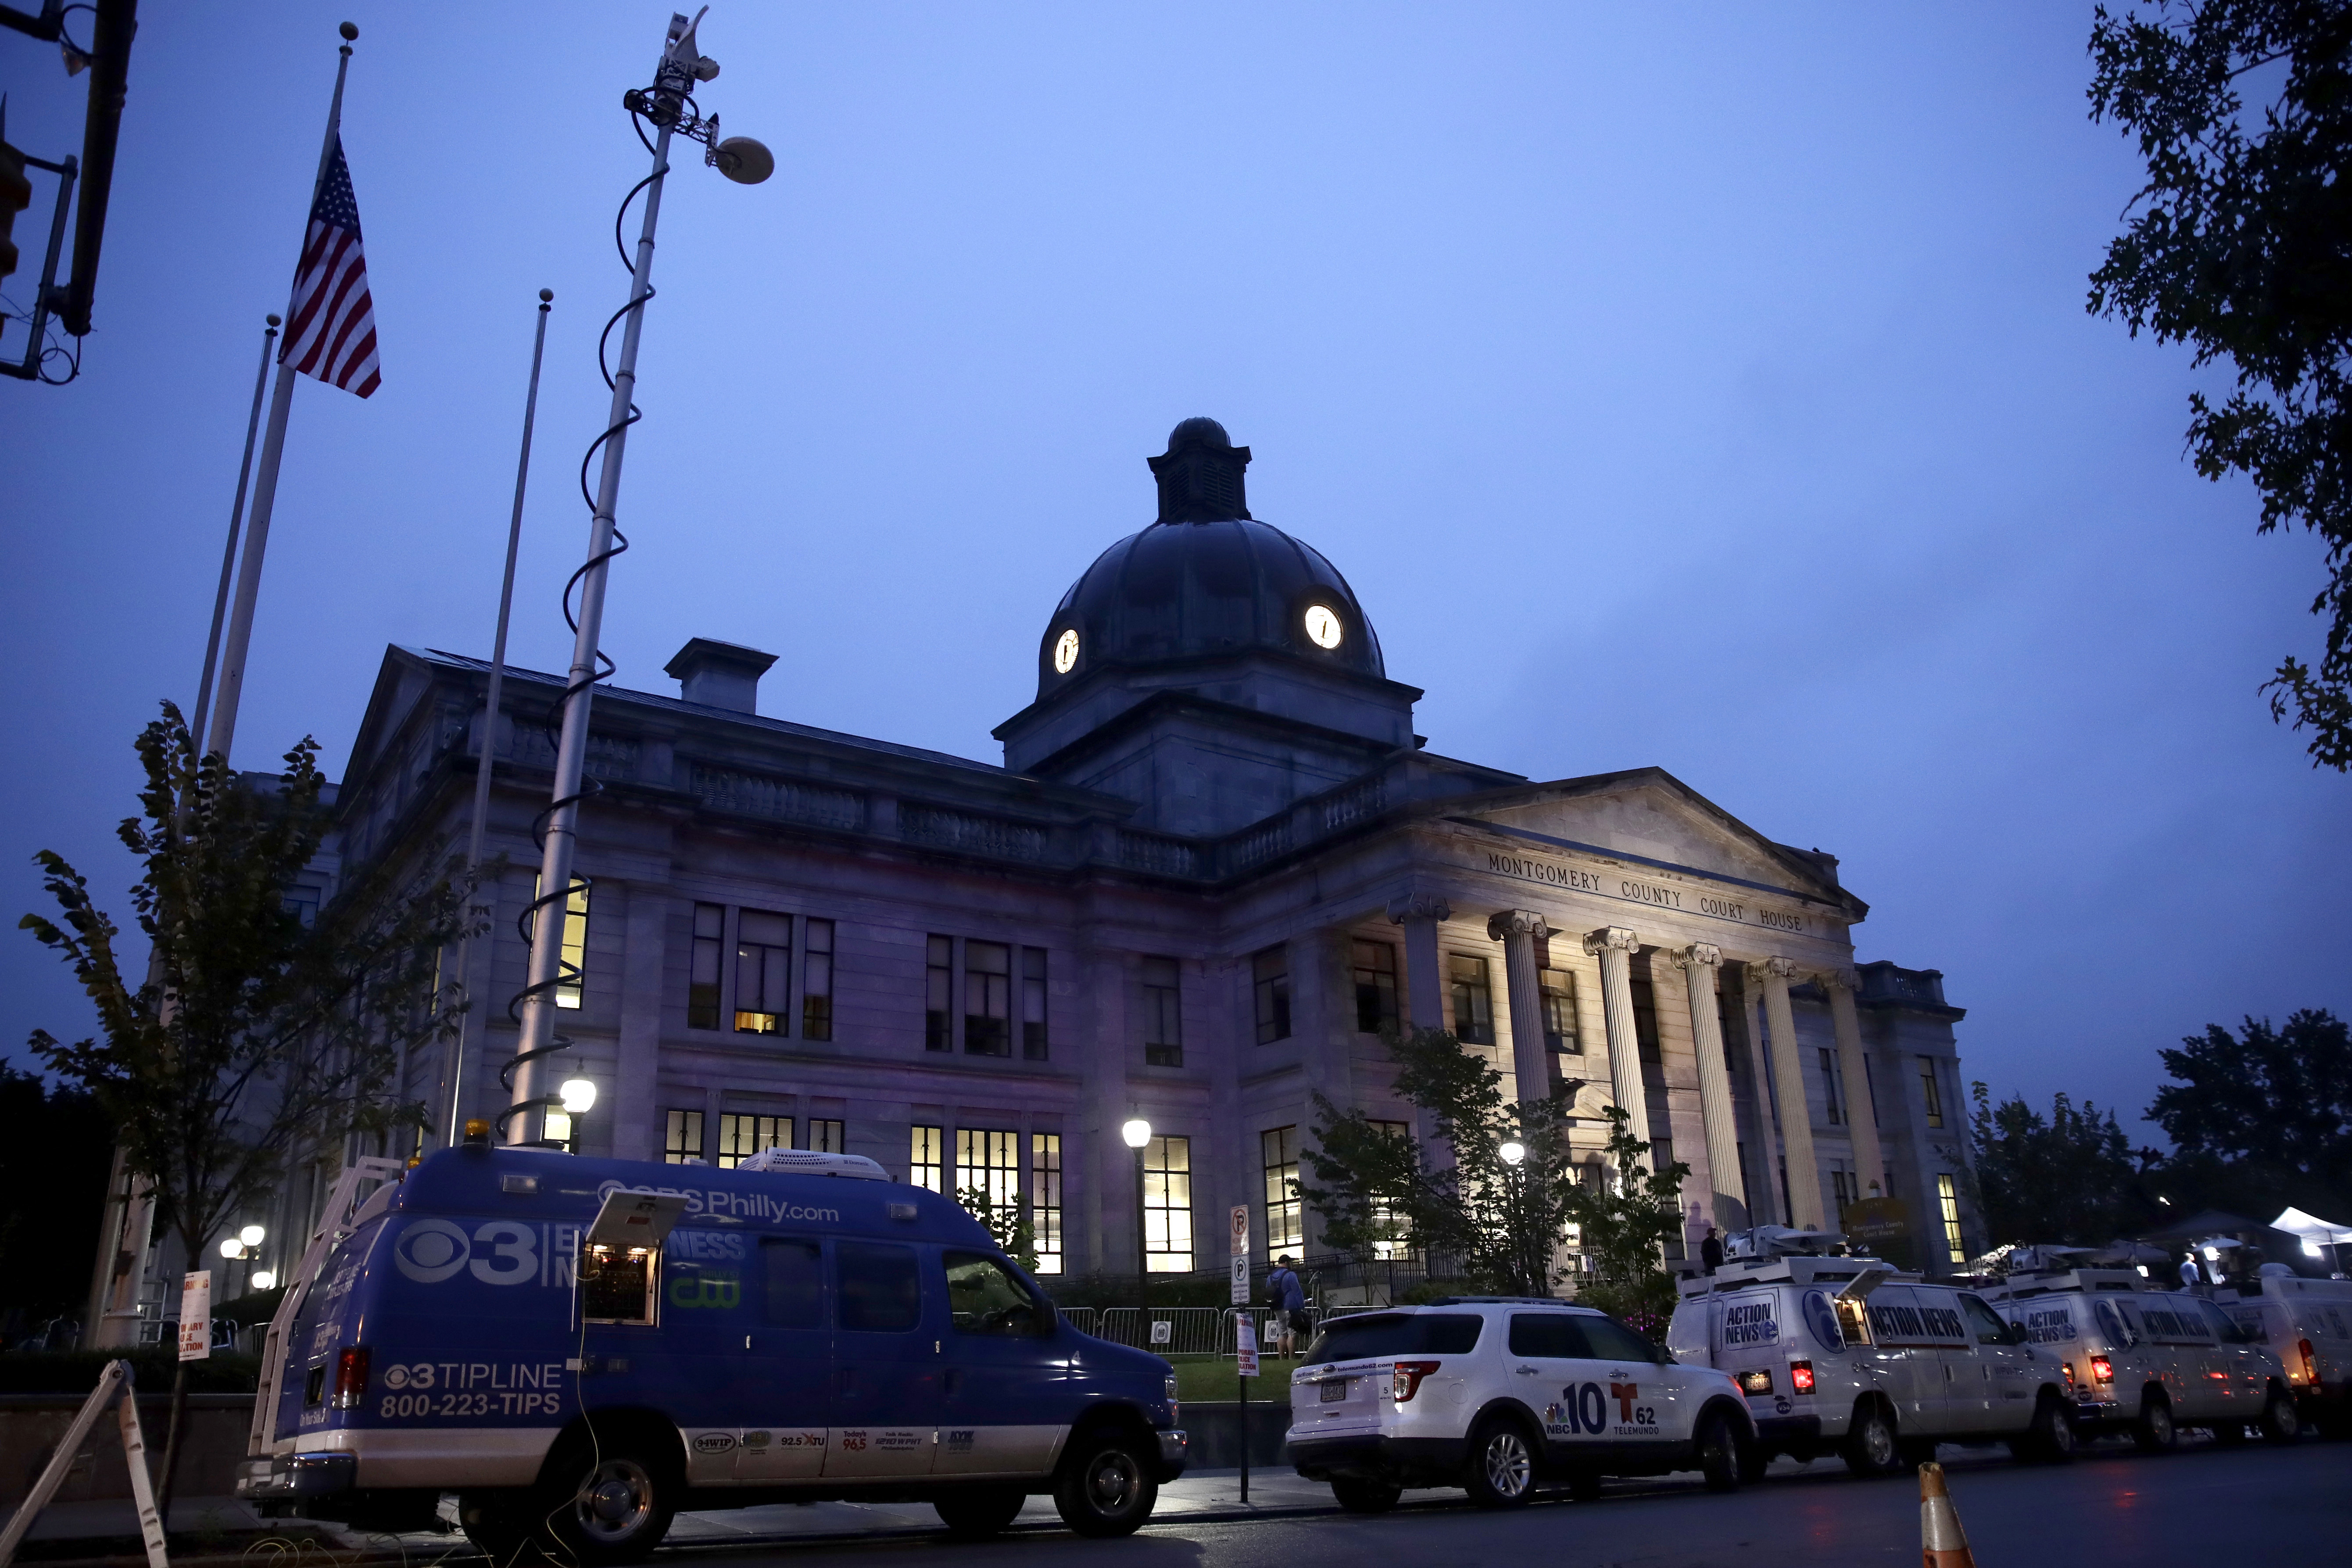 Television vans line the street in front of the Montgomery County Courthouse ahead of Bill Cosby's sentencing